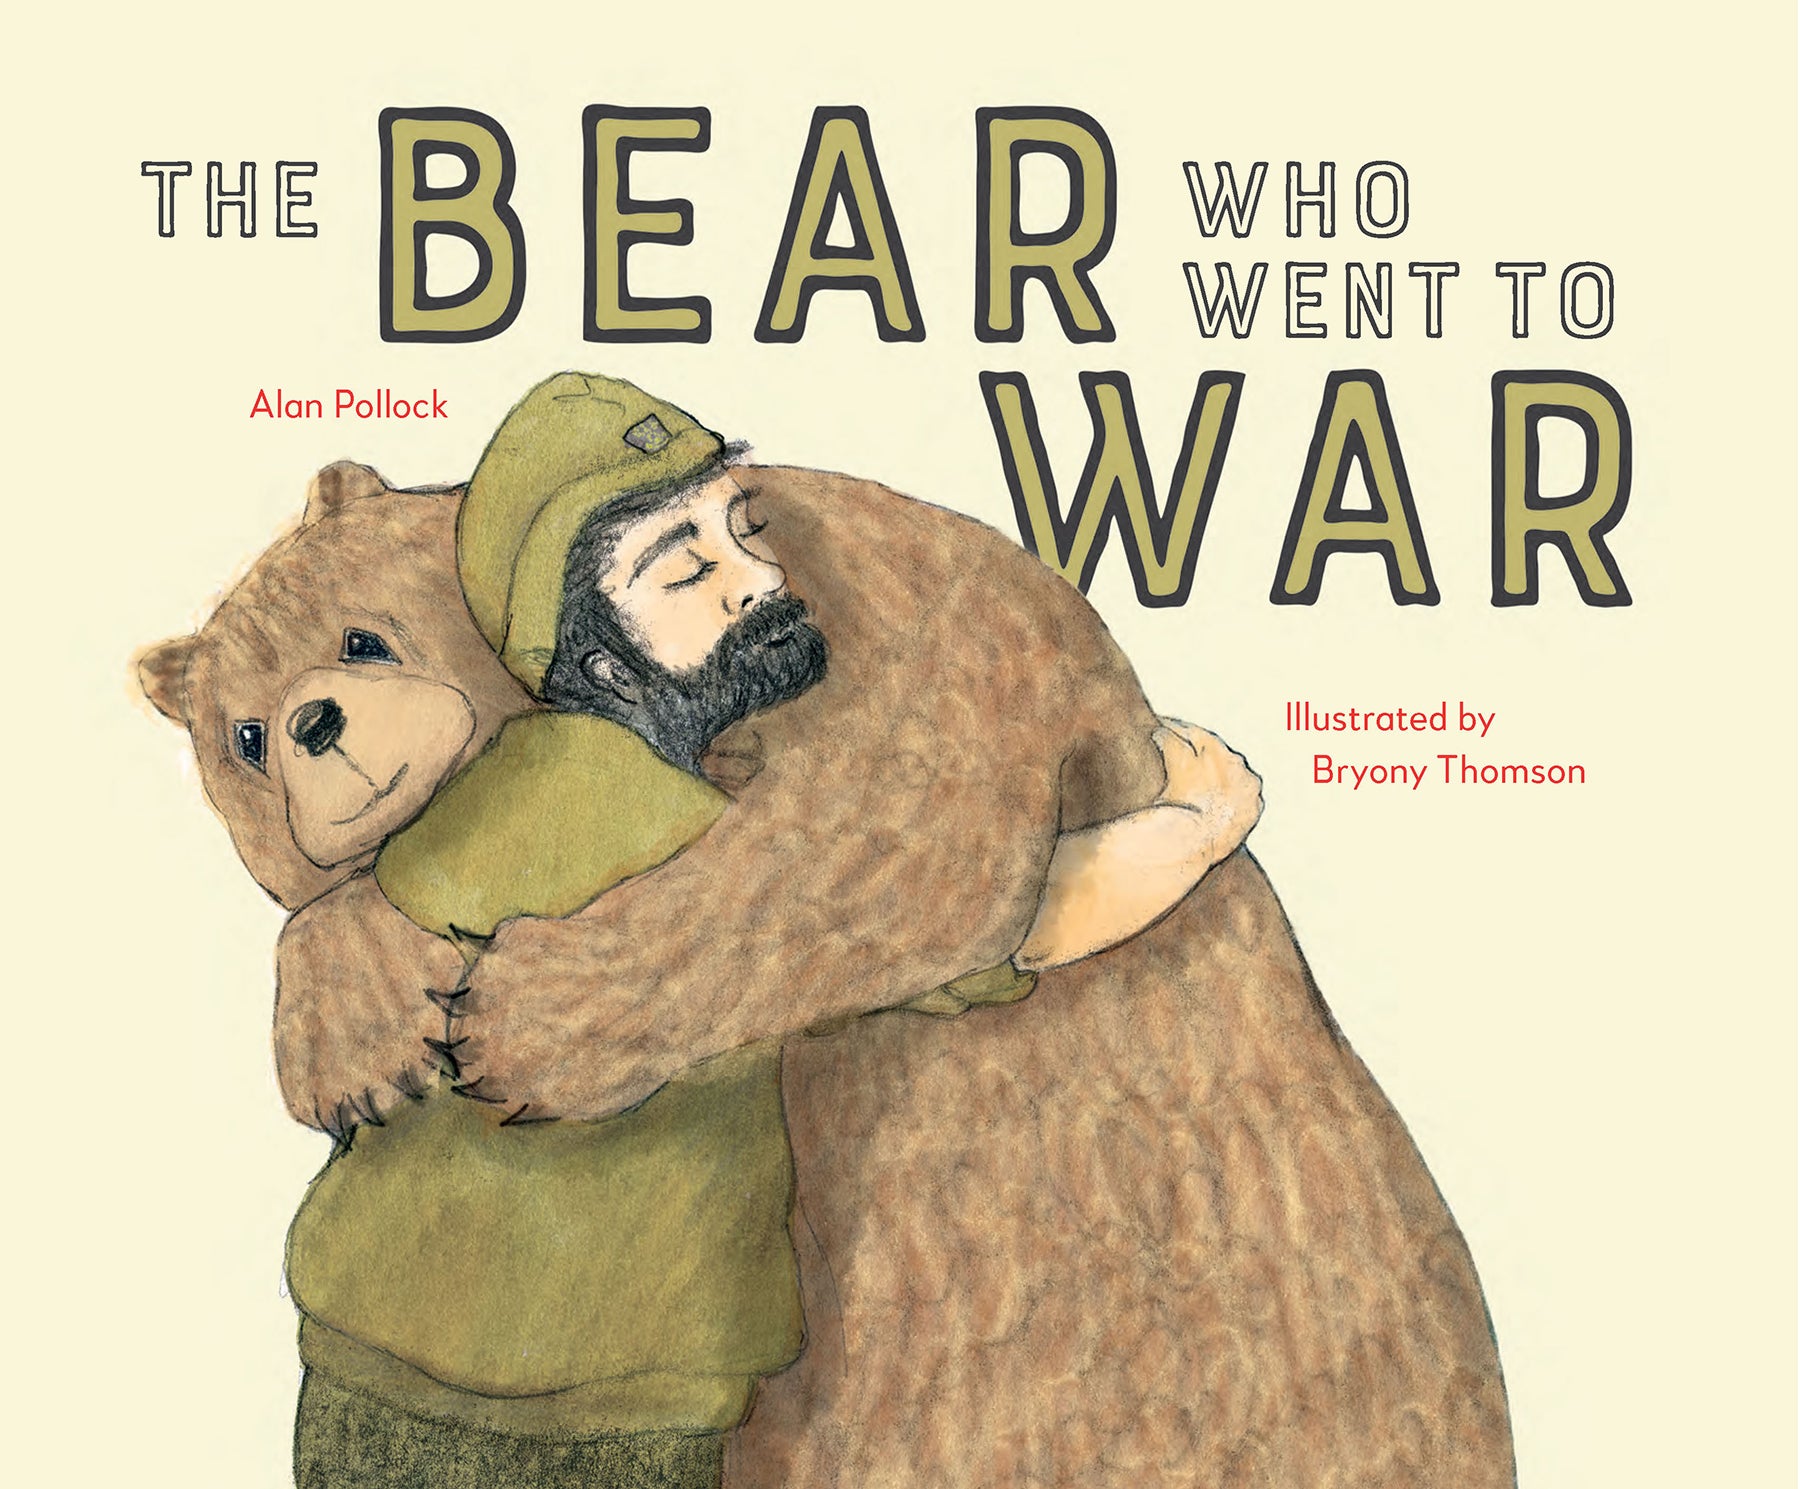 The Bear who went to War by Alan Pollock